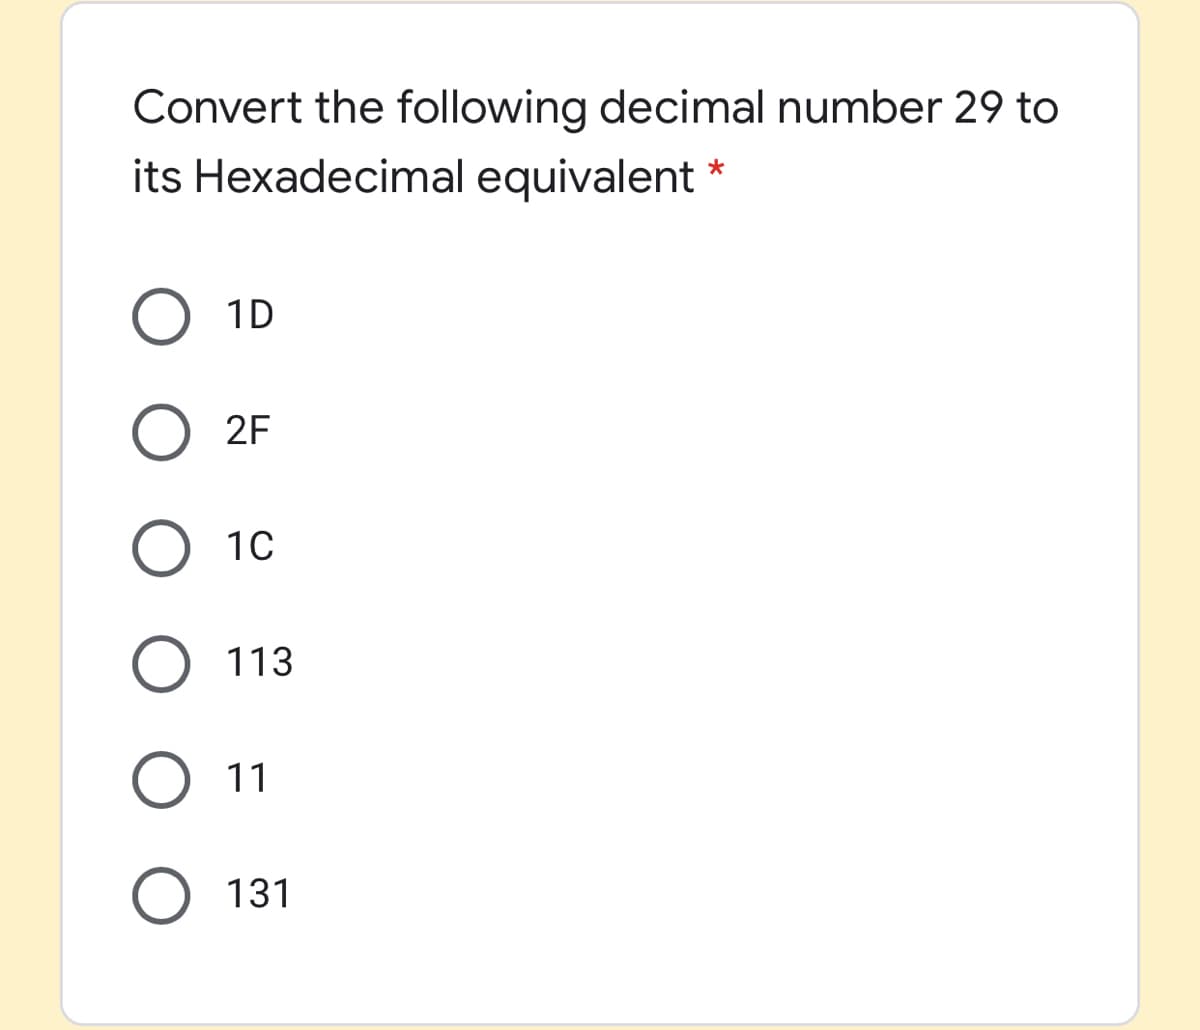 Convert the following decimal number 29 to
its Hexadecimal equivalent
*
1D
2F
10
113
11
131
